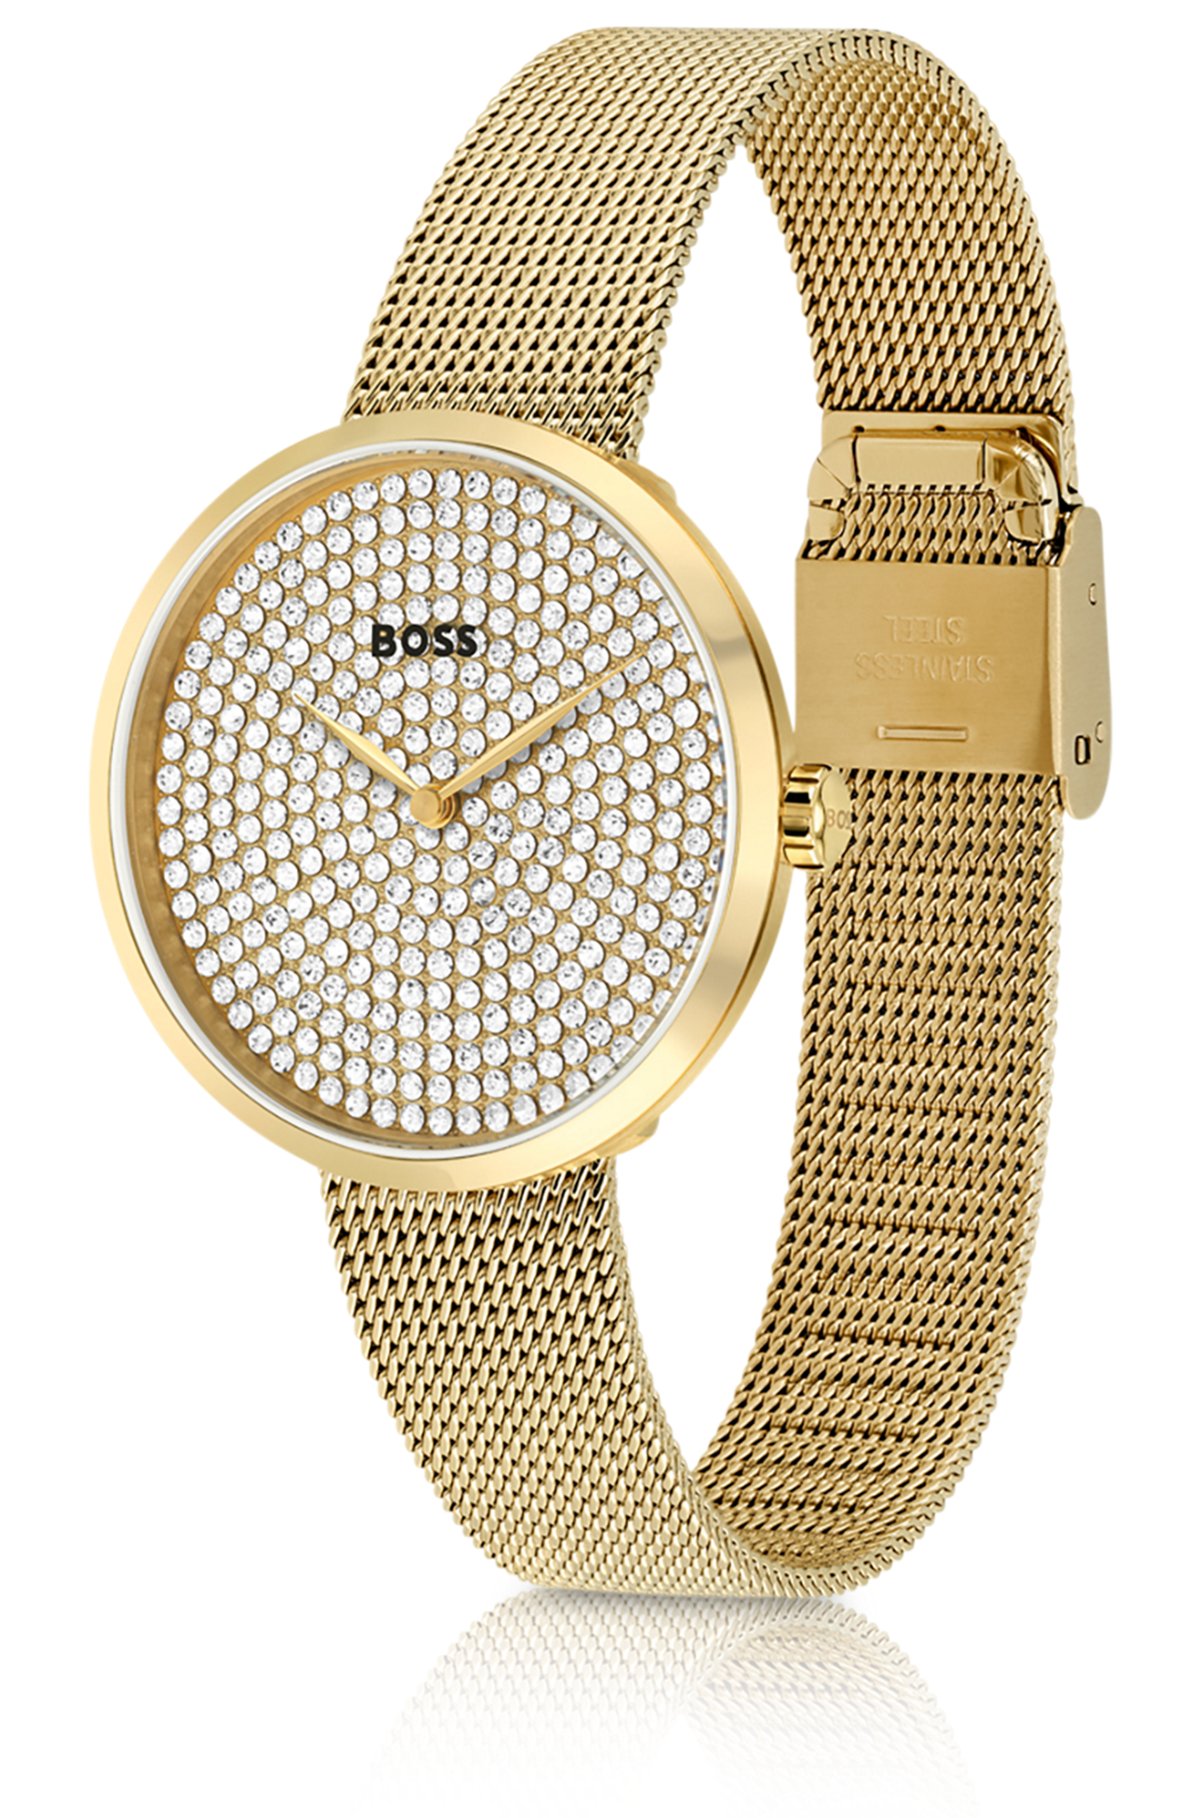 Gold-effect watch with crystal-studded dial, Gold